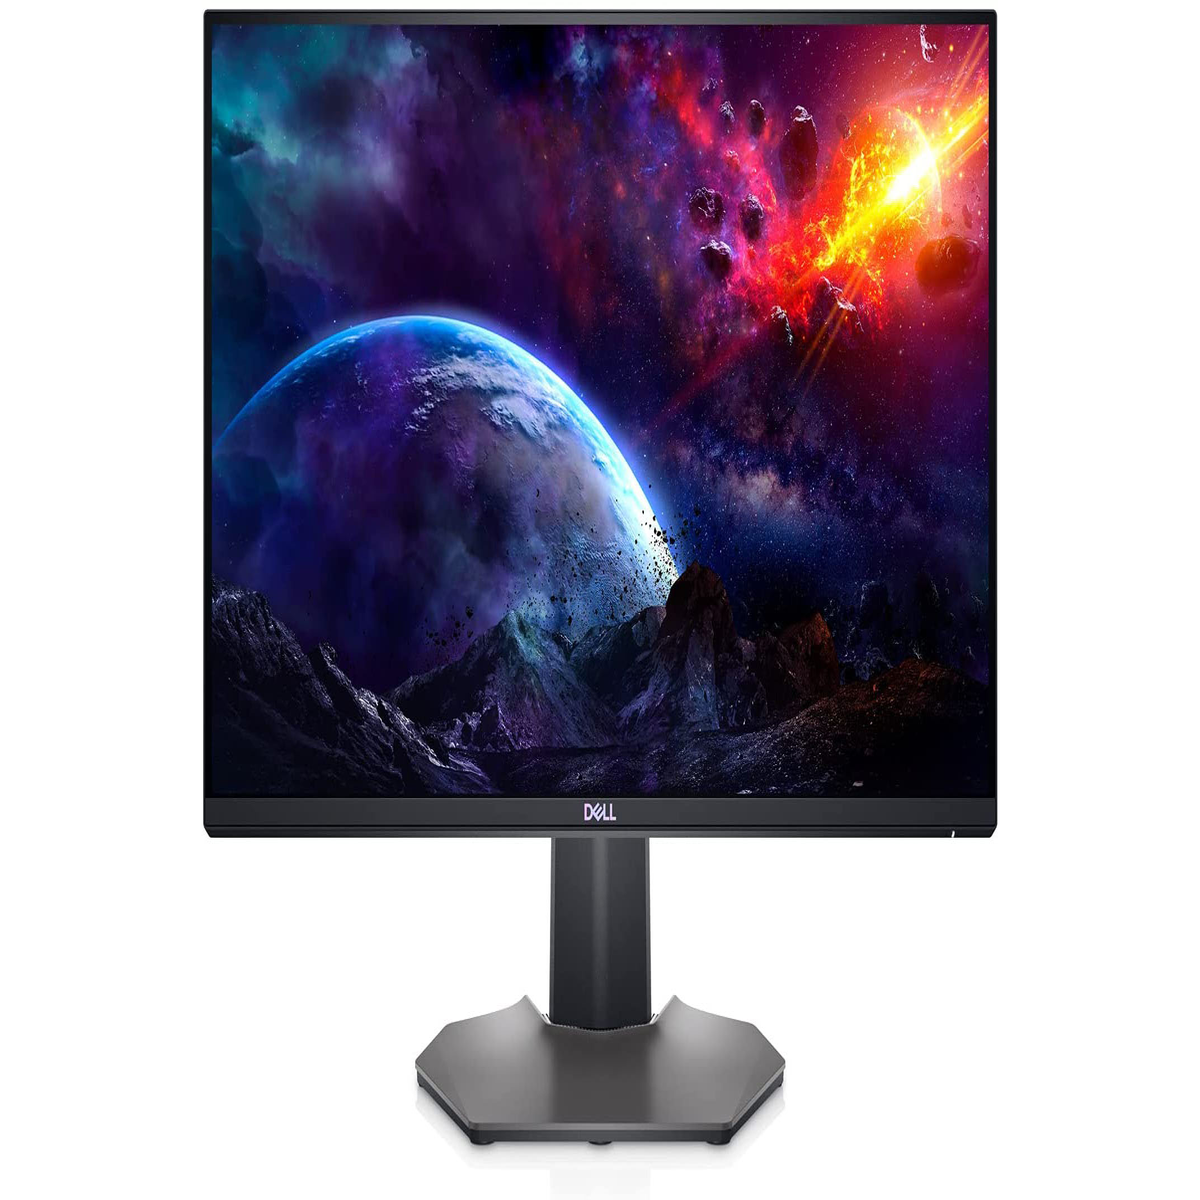 This 144Hz Dell monitor is just $150 right now